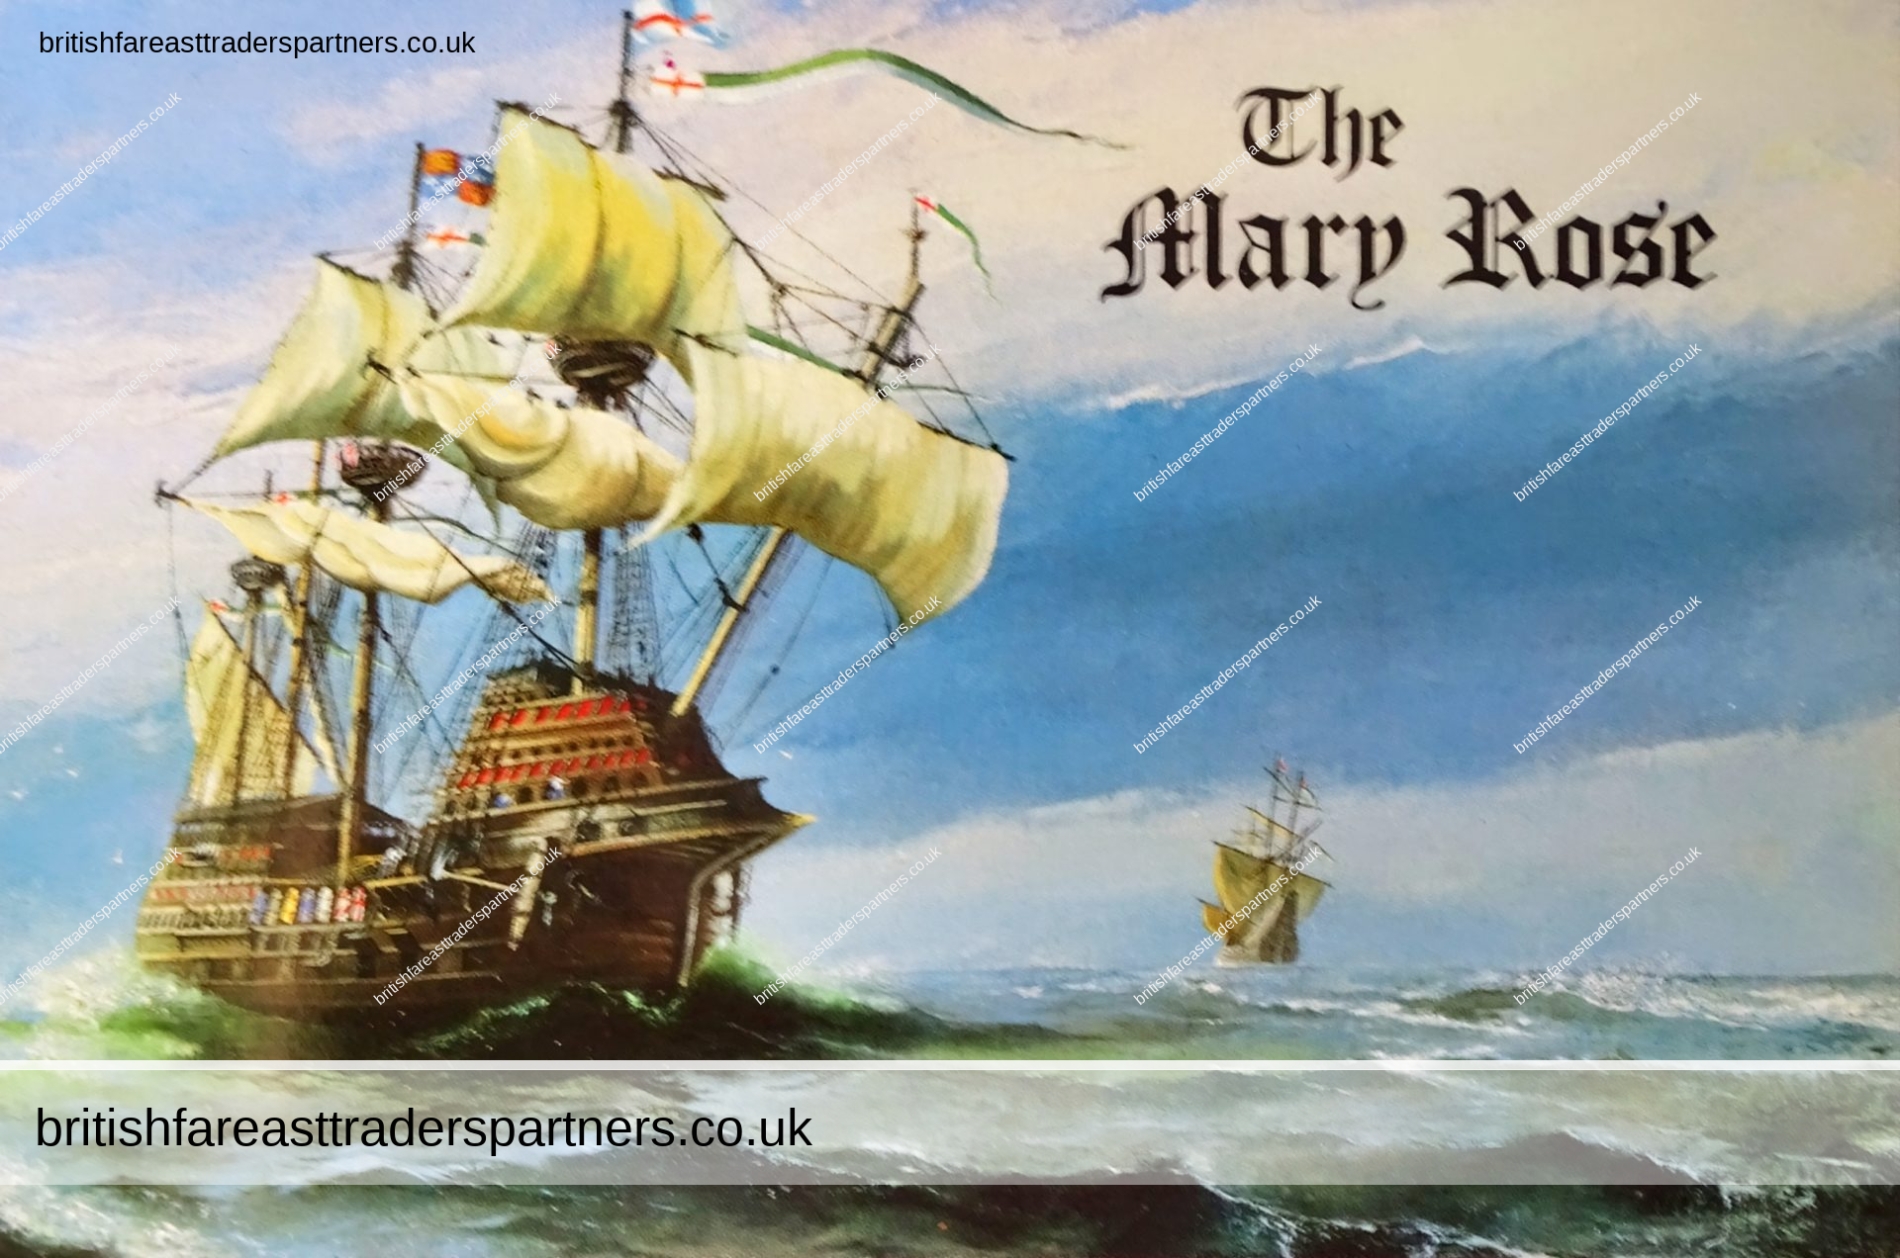 “THE MARY ROSE” POSTCARD SALMON WATERCOLOUR POSTCARD SALMON LTD. SEVENOAKS, KENT PRINTED IN ENGLAND Collectables > Transportation Collectables > Nautical > Other Nautical VINTAGE | MARITIME | HERITAGE | HISTORY | TUDOR MONARCH